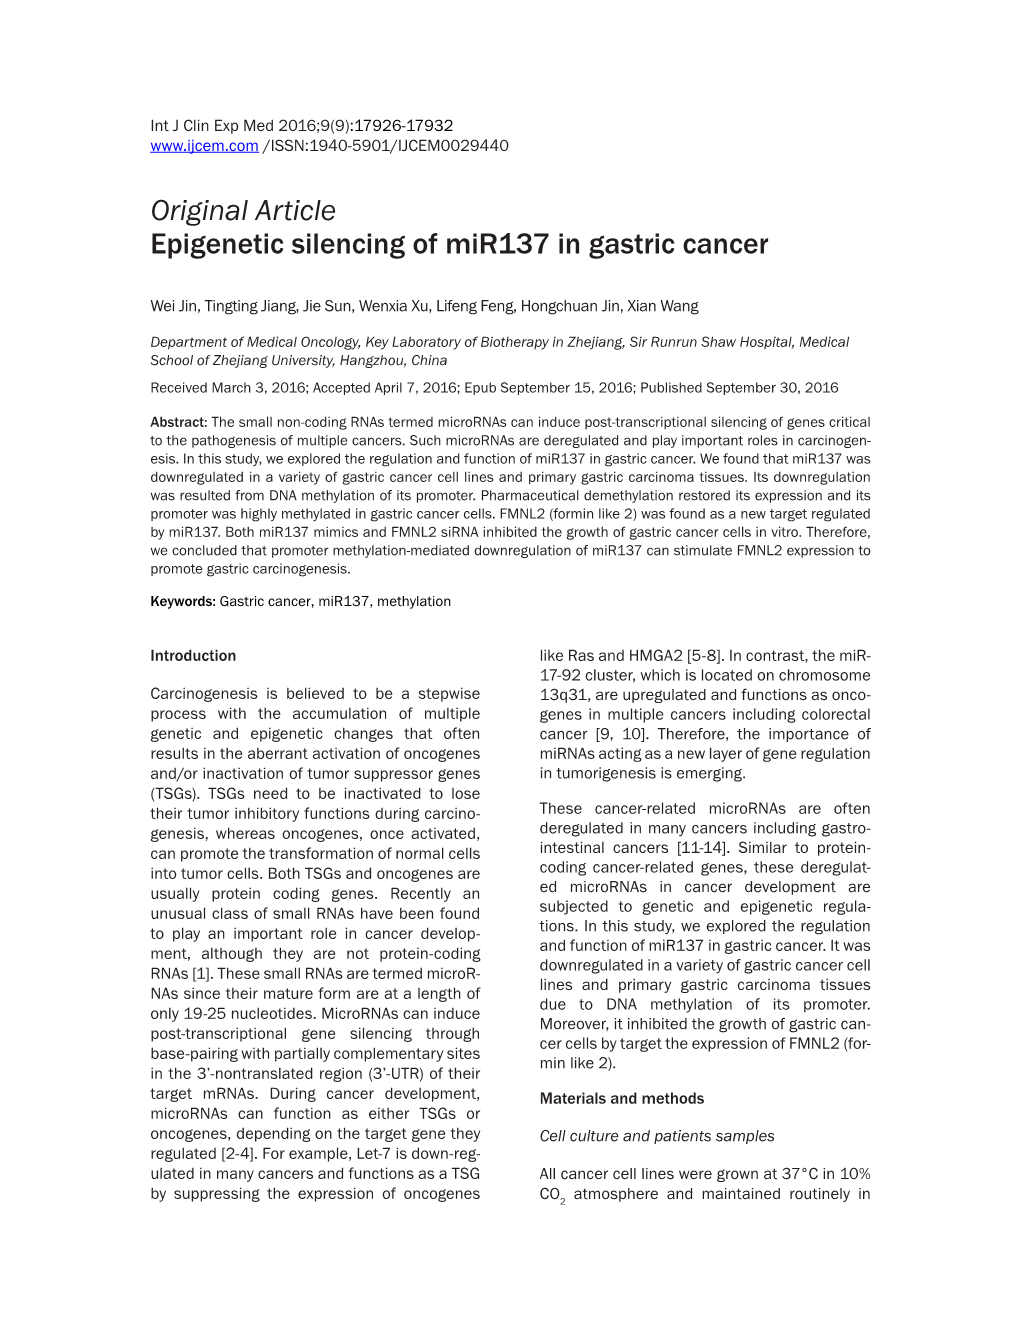 Original Article Epigenetic Silencing of Mir137 in Gastric Cancer